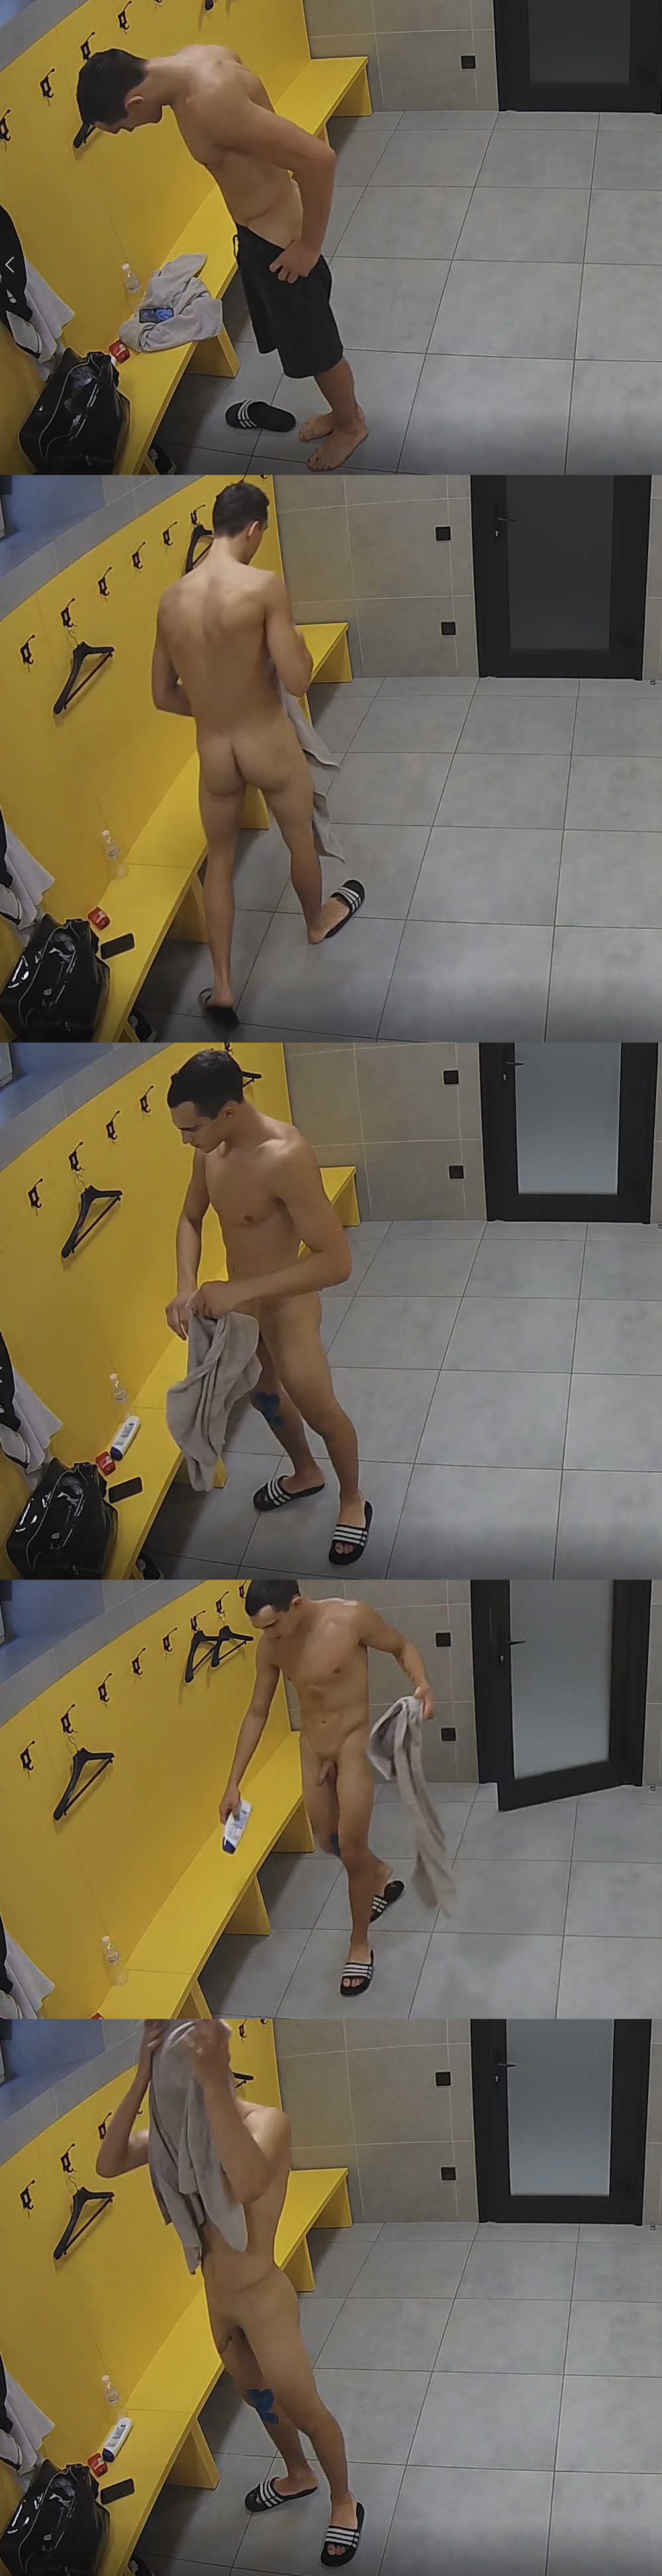 uncut guy undressing and getting naked spied by spycam in locker room